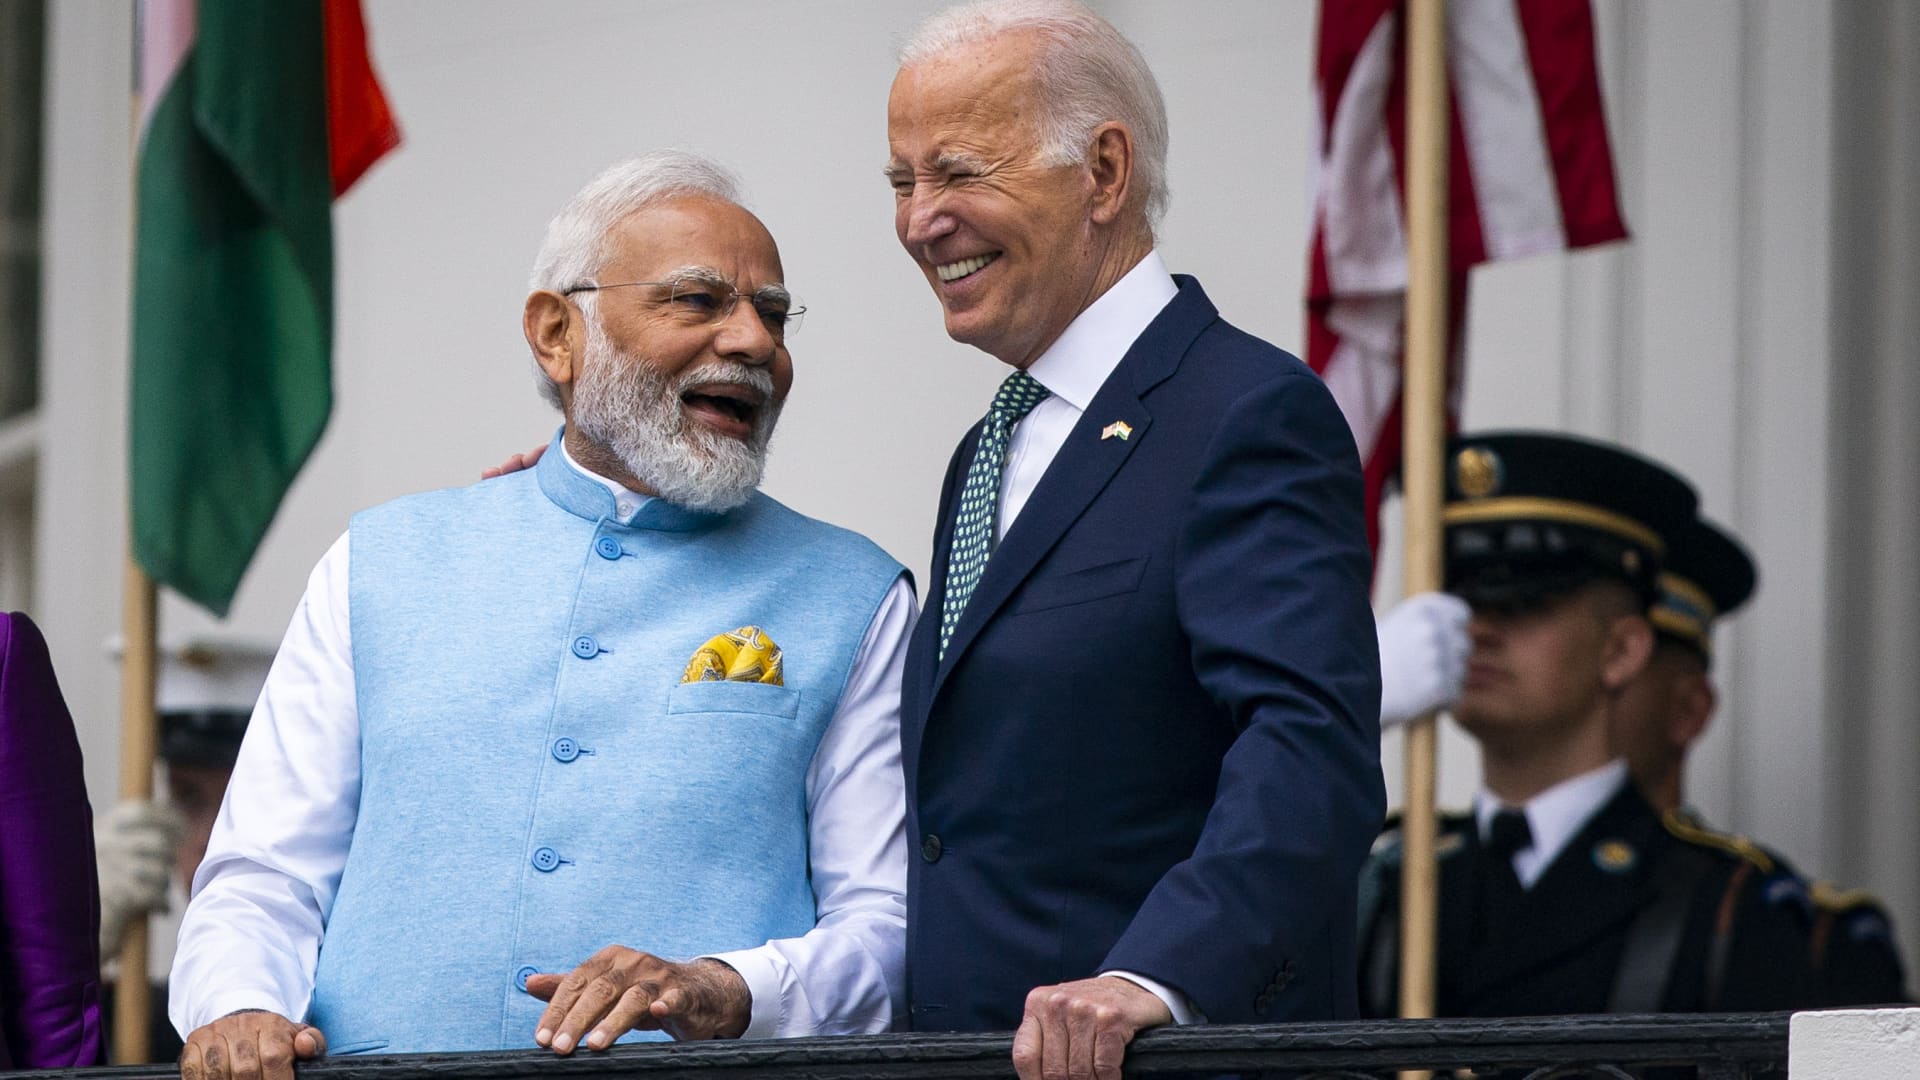 India’s G20 presidency risks ringing hollow as Ukraine war dashes hopes of consensus